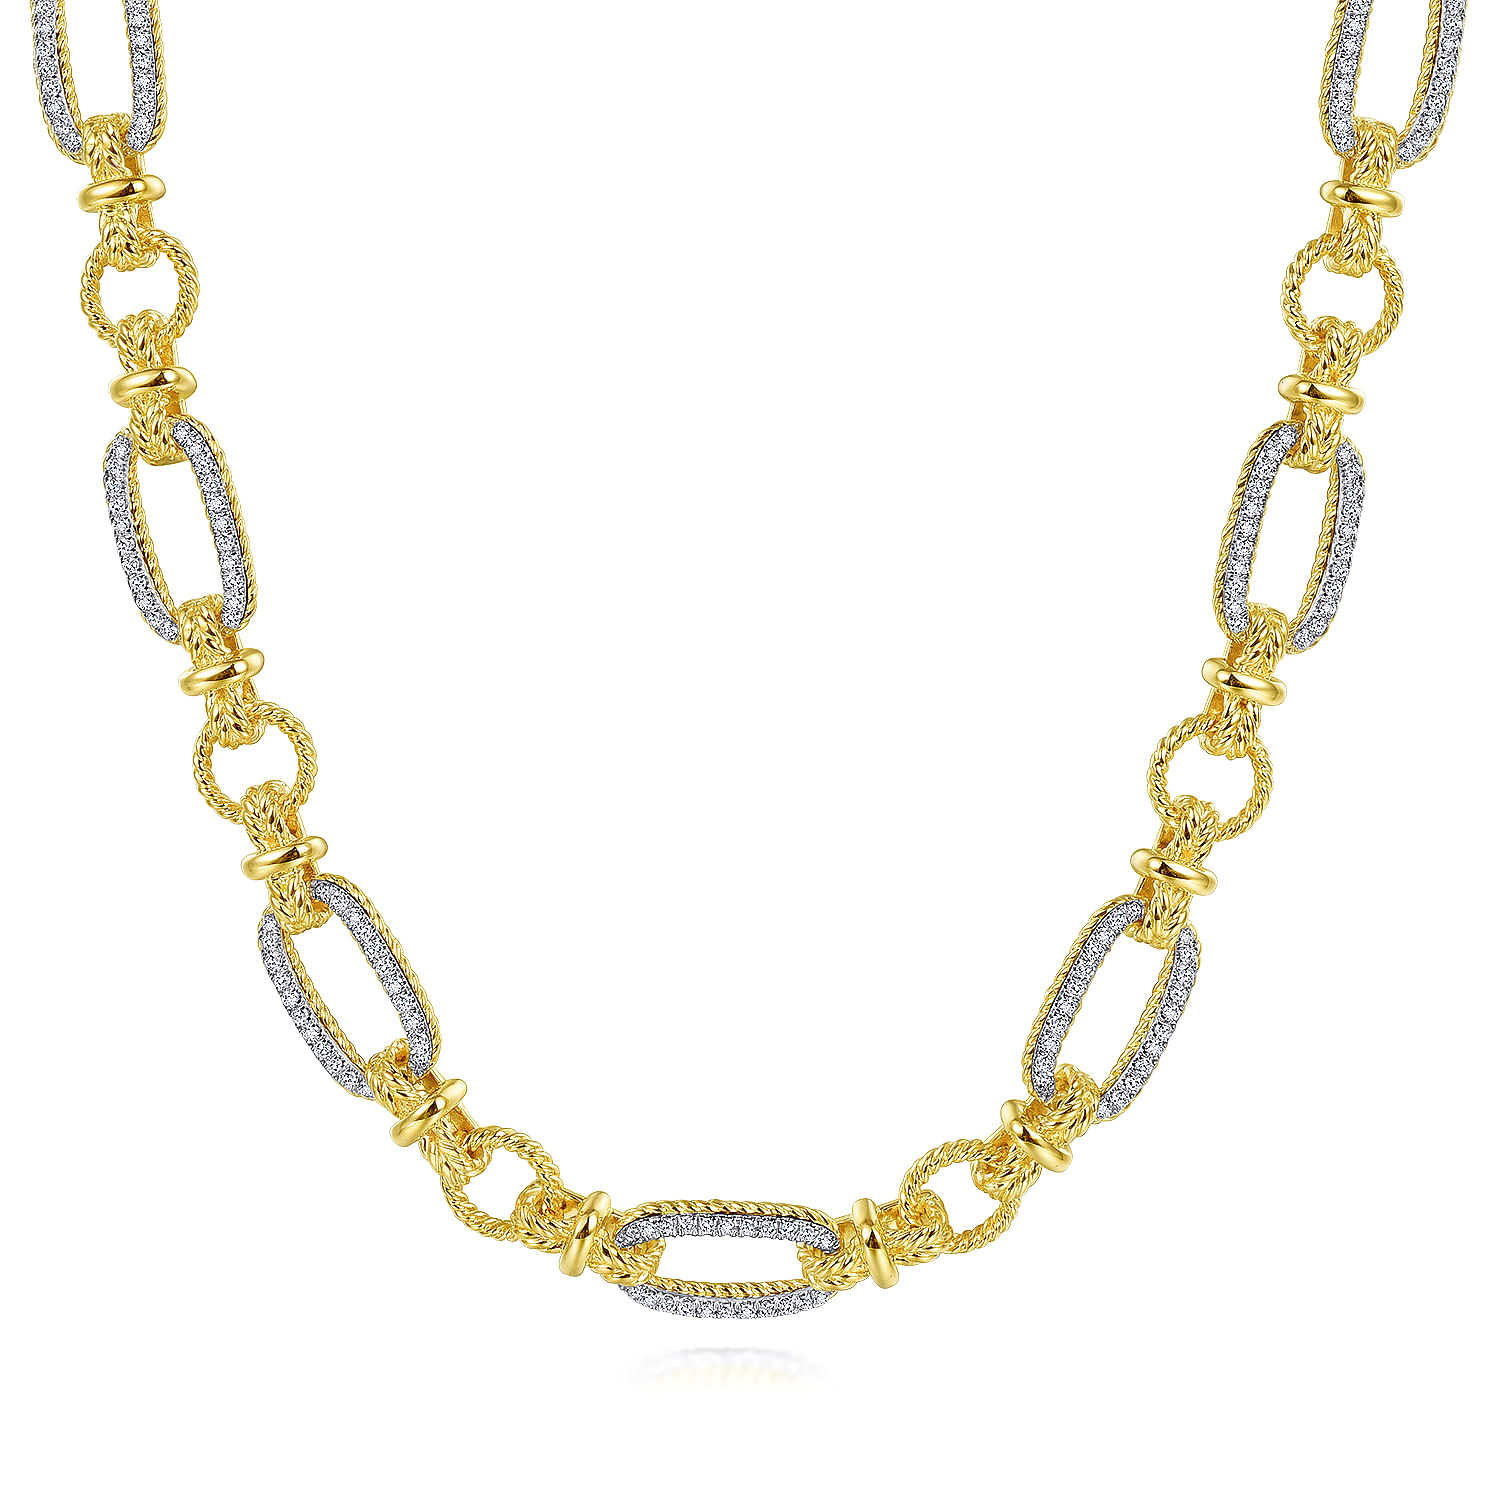 14K Yellow-White Gold Oval Chain Twisted Rope Link Necklace with Diamond Pavé